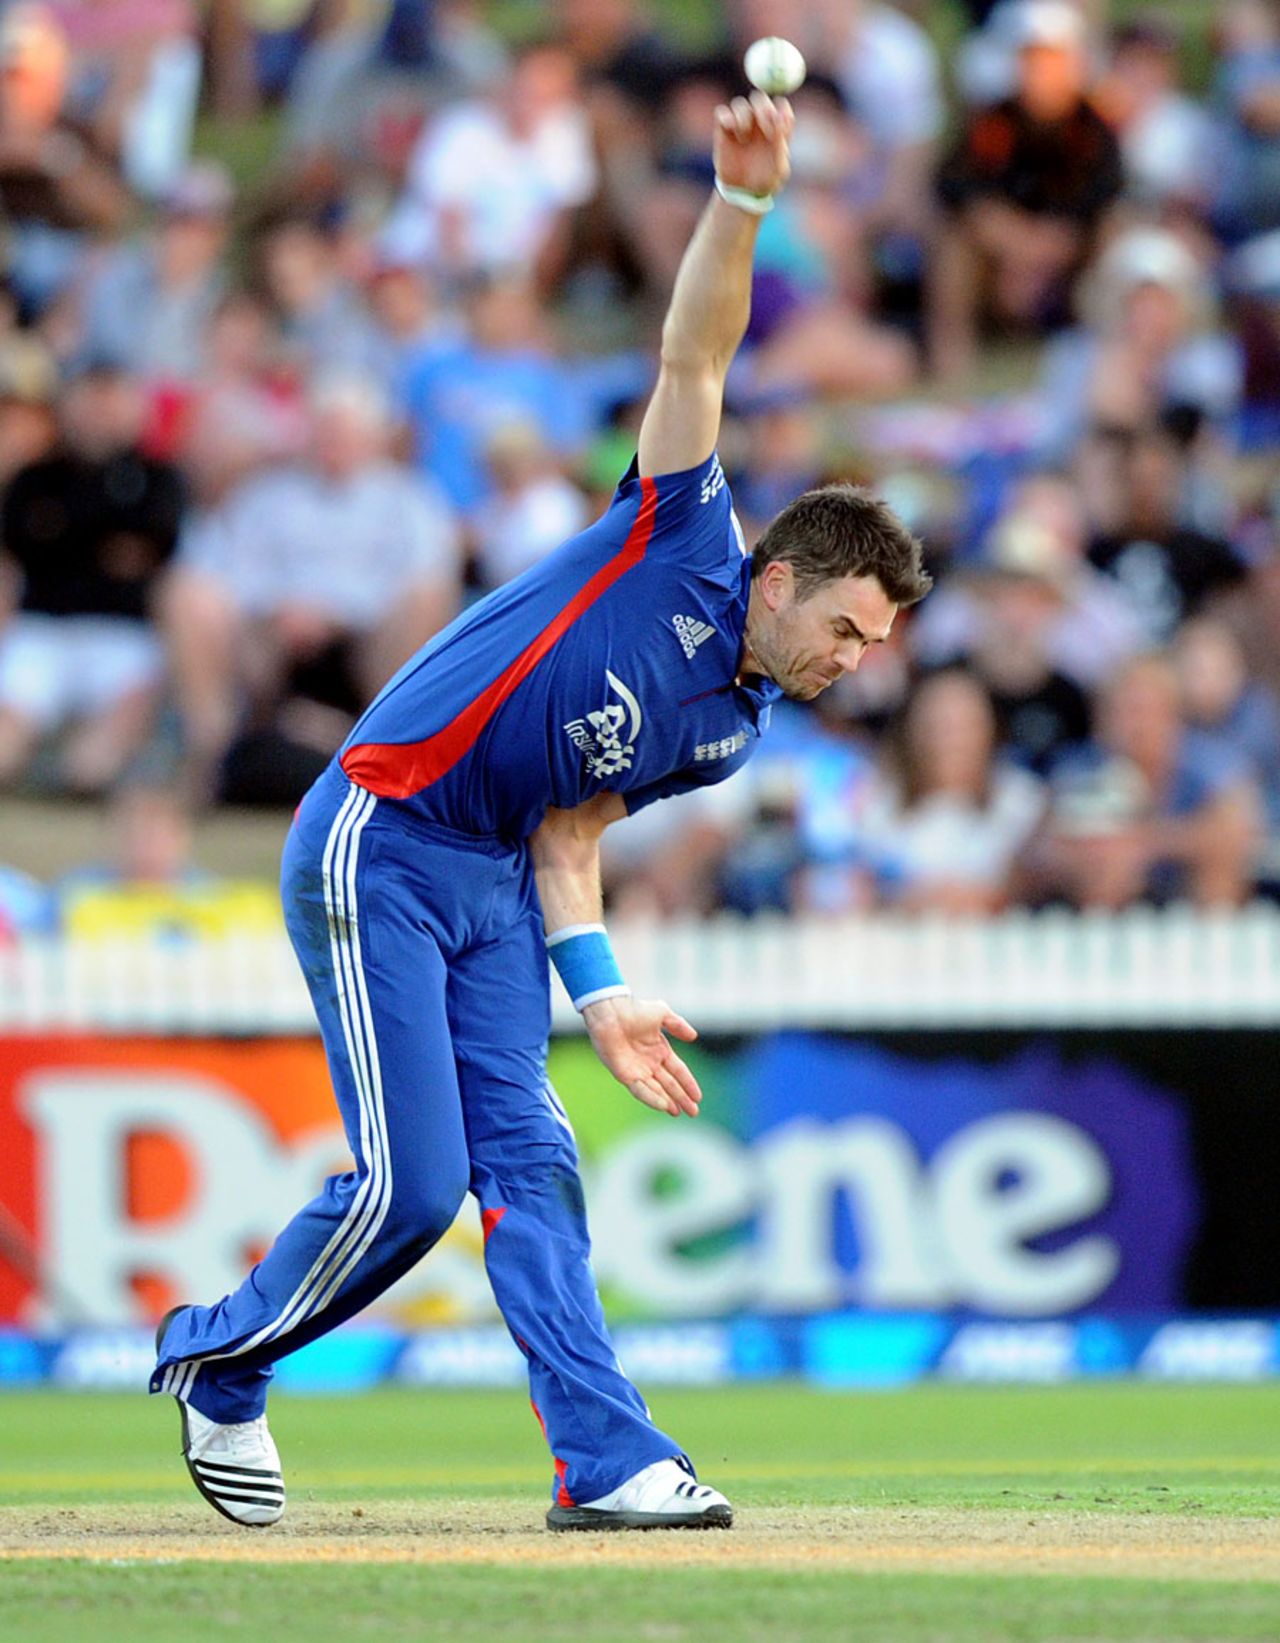 James Anderson now has the most international wickets by an England bowler, New Zealand v England, 1st ODI, Hamilton, February 17, 2013